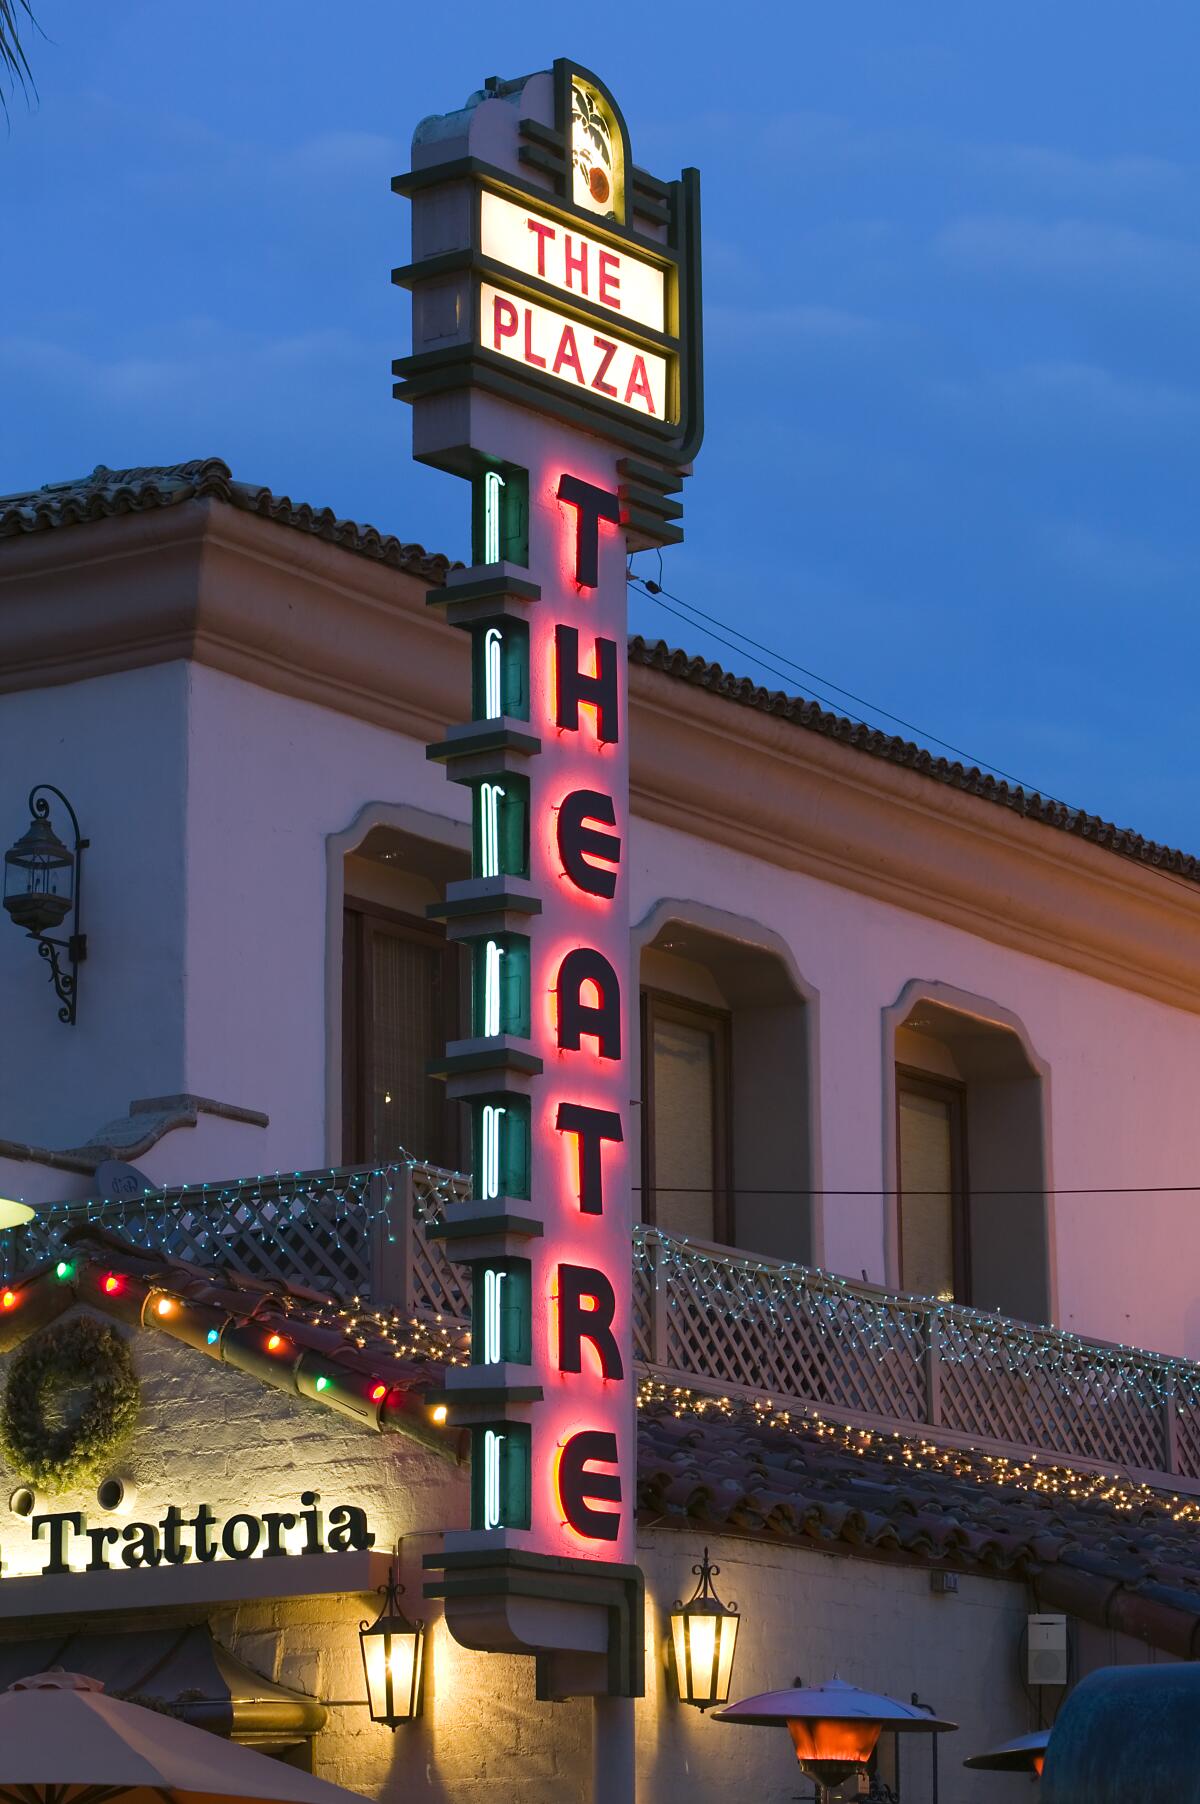 The neon sign on the historic Plaza Theatre in downtown Palm Springs.